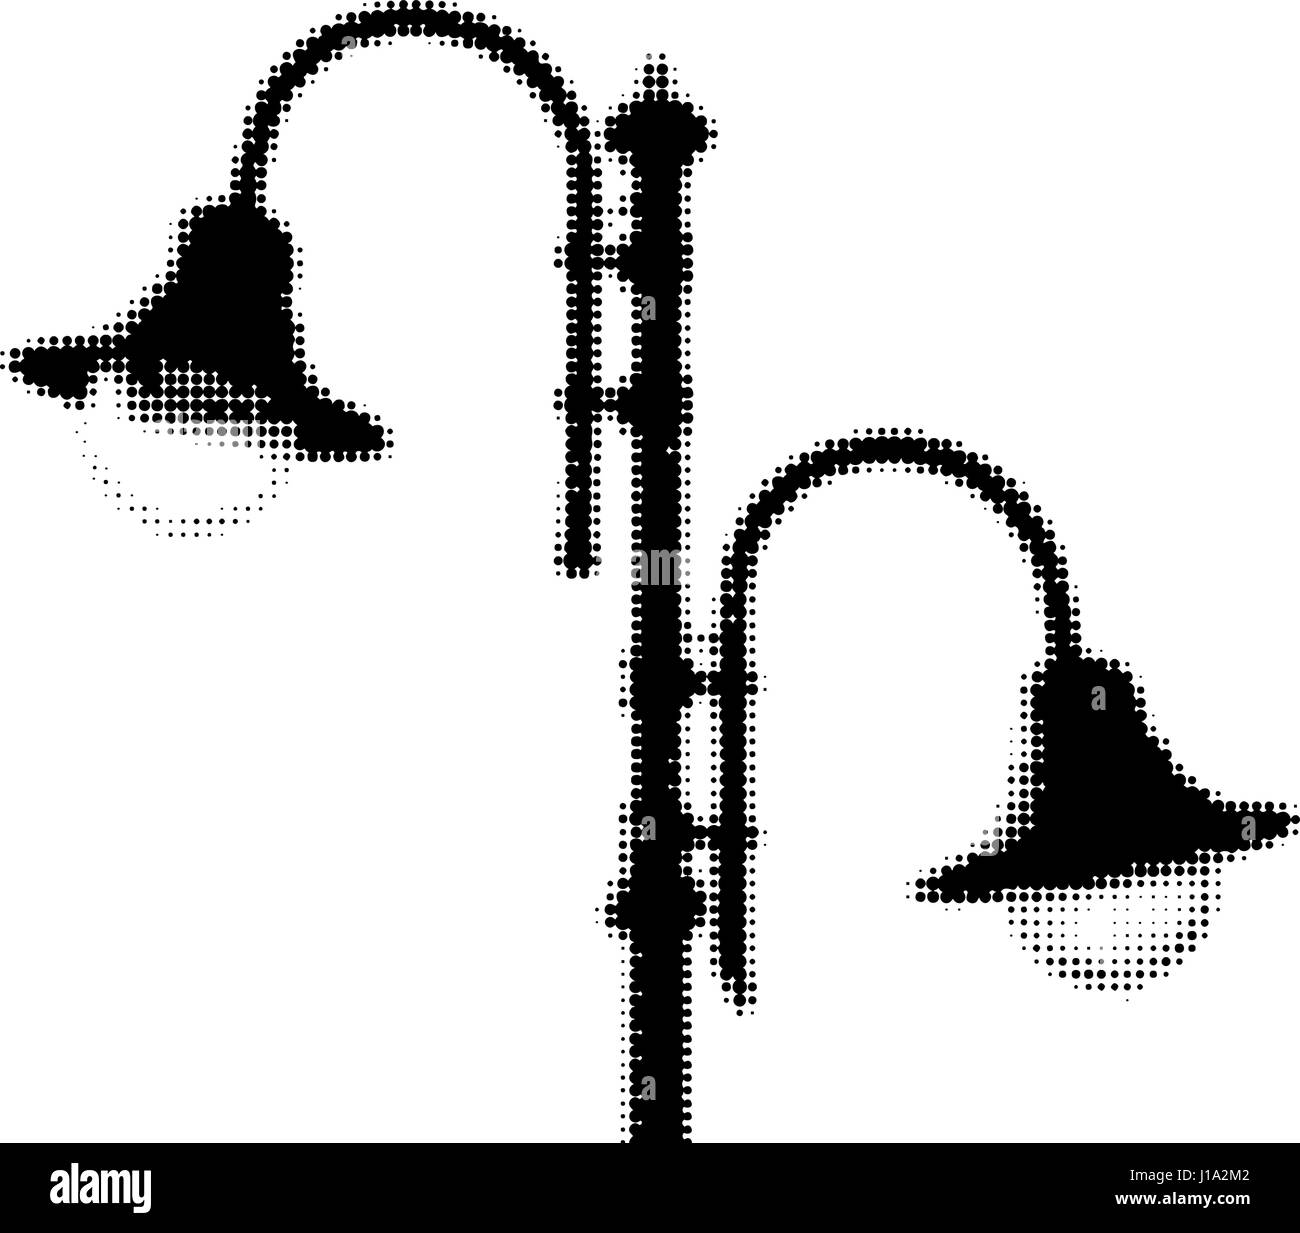 Vector half-tones image of lamps on the lamppost Stock Vector